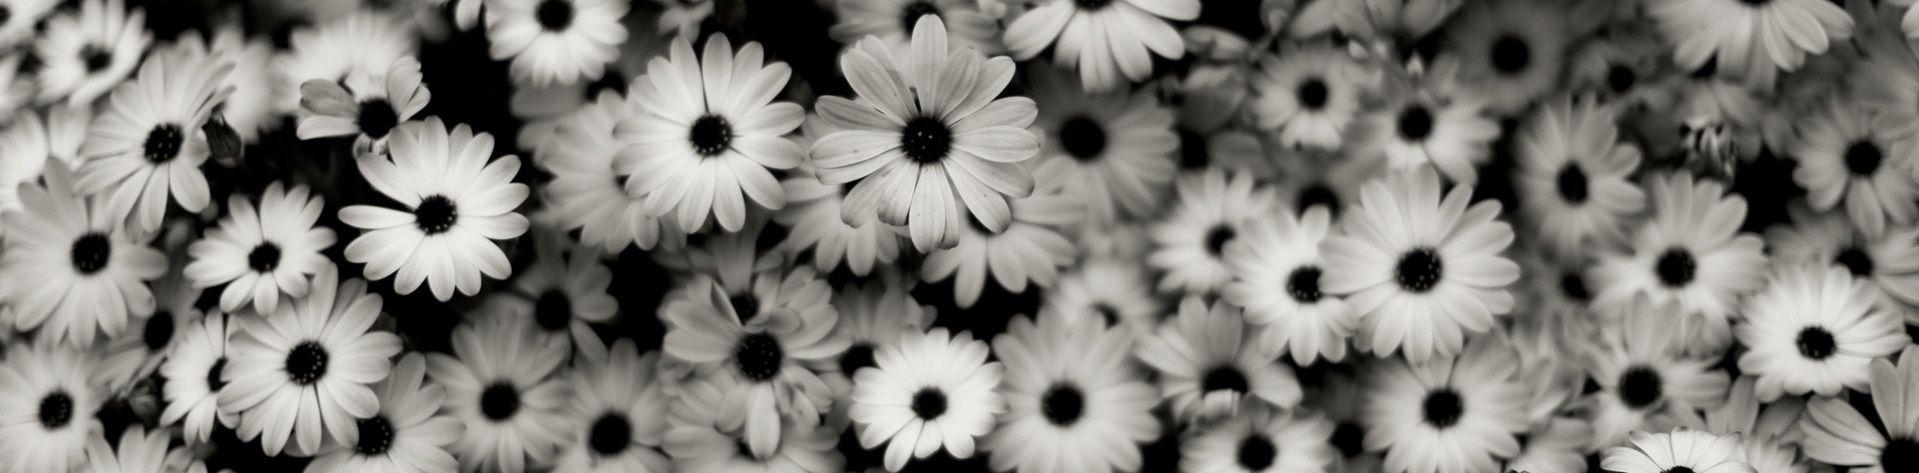 Black And White Background Tumblr Flowers